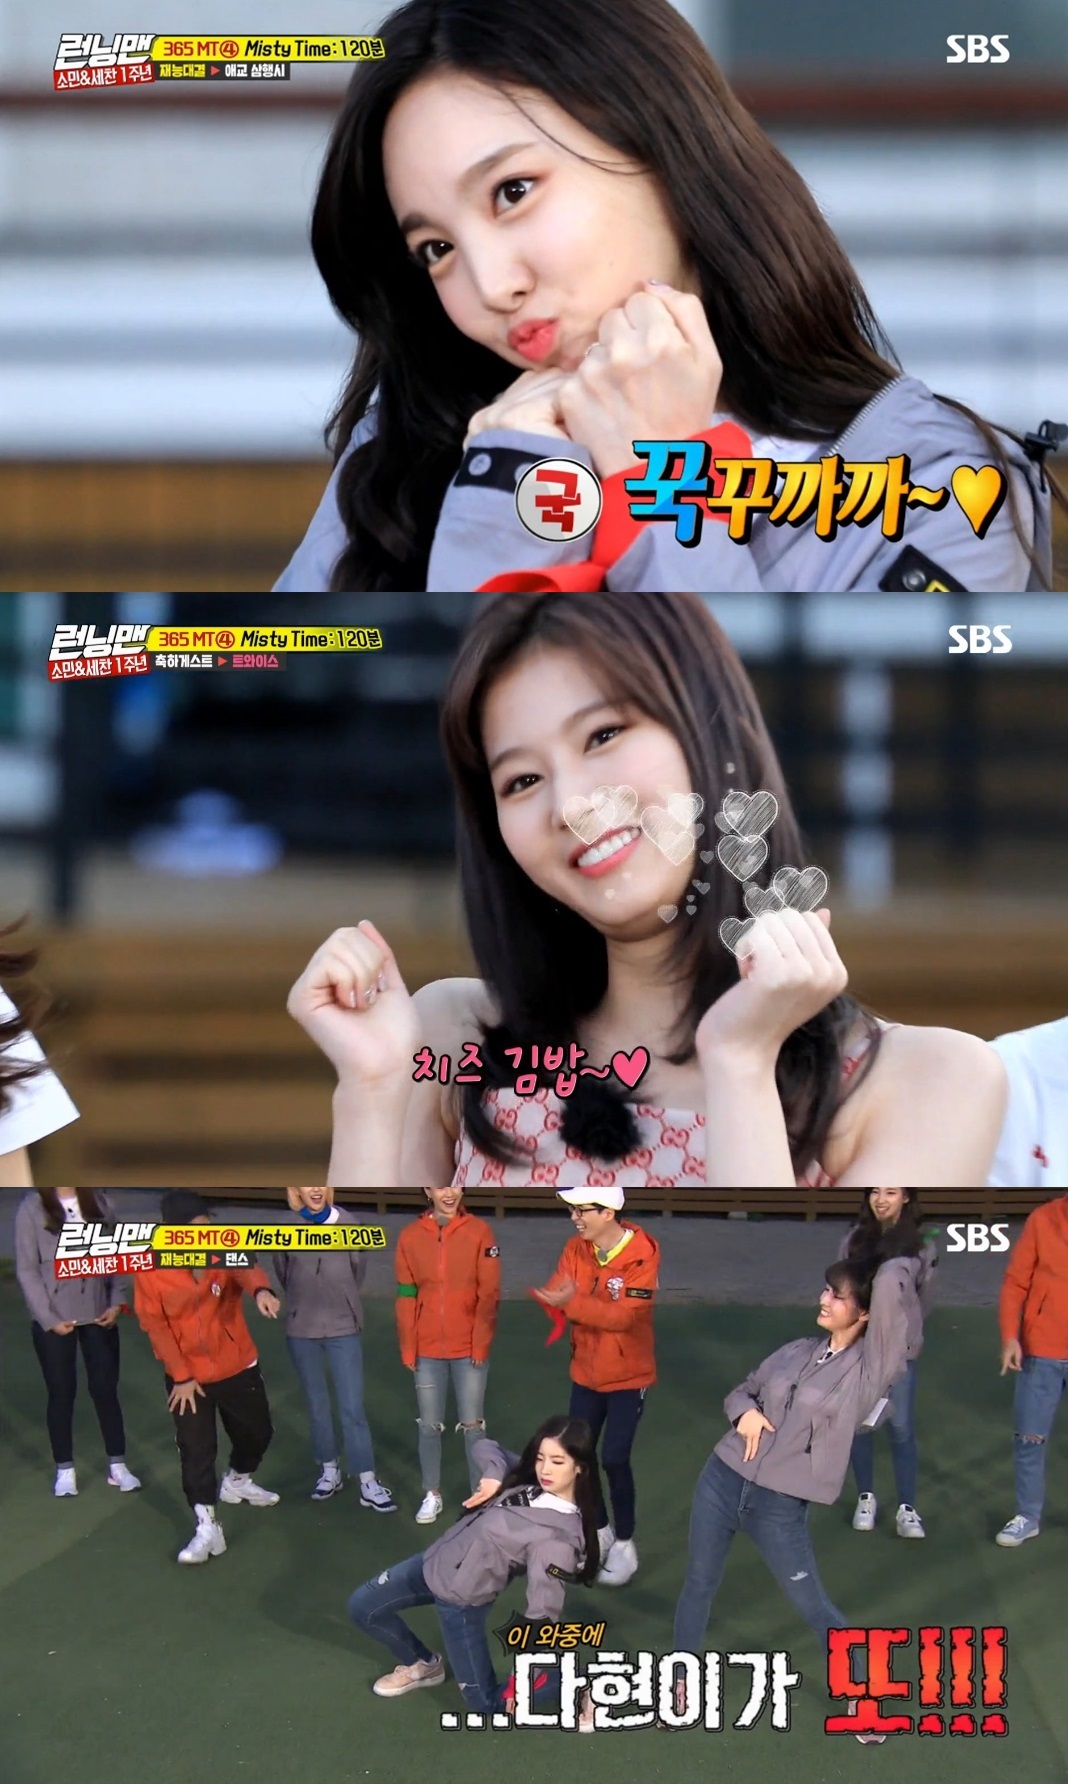 <p>16, the first broadcast of SBSs new for Michuthrough the viewers and meet Black Pink Jenny, your comeback music charts which swept TWICE, the drama beauty theimpressive acting topics which Lee Da-hee of the common all year Running Manand have worked together for the movies stars.</p><p>These are the Running Man appearances with unexpected jjalbang to popping online and SNS hot a month ago, and then it was Running Manre Smoking that Sticky of the book. Everything here is people Pictureswhich was Hollywood actor Tom Cruise, Running Manthis love of the year jjalbang stars introduction.</p><p>◇ Black Pink Jenny : authentic Jenny joined the broadcast</p><p>Black Pink Jenny said and other behaviors with a laugh. Jenny Lee Kwang-Soo paired up with was a water Park inside your in your house type to make I believeand the rant was, but the result is voice and wept. Running Man representative coward Lee Kwang-soo offers to lead was, that whenever it appeared to the demons of the RAID on cried. Mission finished Jenny The Ghost Inside came out and I was not?said another whimper, members of this kind of cute look on Tara declared. Since Running Manre Smoking and sticky of course.</p><p>◇ TWICE : school+dance their birth</p><p>Last 4 October in starring in Running Man members of the hot cheers received TWICE the small people X as joined 1 year anniversary special surprise guest was in the active as a laugh, I found myself. My Smoking has now also been a state change until the birth and school equipment, such as pole had, and all that approach youcloser to the gods dance as the scene of the story. In particular, the expression is BTS burning chatfrom celebs YouTube celebs want to beup my music all the choreography for ‘dance machine’was recognized.</p><p>◇ Lee Da-hee : break not the ‘fashion manufacturing’</p><p>Family Package projecttogether was actress Lee Da-hee is a Yum students remarks as Running Manand the relationship. Over the past 2 November in the ‘Running Man’had appeared, Lee Da-hee is the glory and mission during the ‘trickier’witness your yum playRage of dialogue with an unexpected, fashionable born. Since Lee Da-hee is Mins piece, where the wrong done learned?; or once the scene of laughter you break not fashionable to manufacture. It is this expression of and dance, wing-walking, a penalty such as the one of the waves was born.</p><p>◇ Tom Cruise : brother why ‘Running Man’With Me?</p><p>This years Running Man Best Guest would be to never have that Hollywood actor Tom Cruise is all cut their prestige pictures. The movie Mission Impossiblein the real action of the week, but the ‘Running Man’members and through the uncle of the game to reverse the charm and showed them, Running Man signature name tag and a unique friendly charm.... Tom Cruises impassioned performance arts activities ‘Running Man’is of course online and social media until we have received him, and, hot jjalbang starto be born again.</p><p>Meanwhile on the 11th at 4 PM 50 Minutes broadcast of Running Manis the special 8 South lacedecorated.</p>